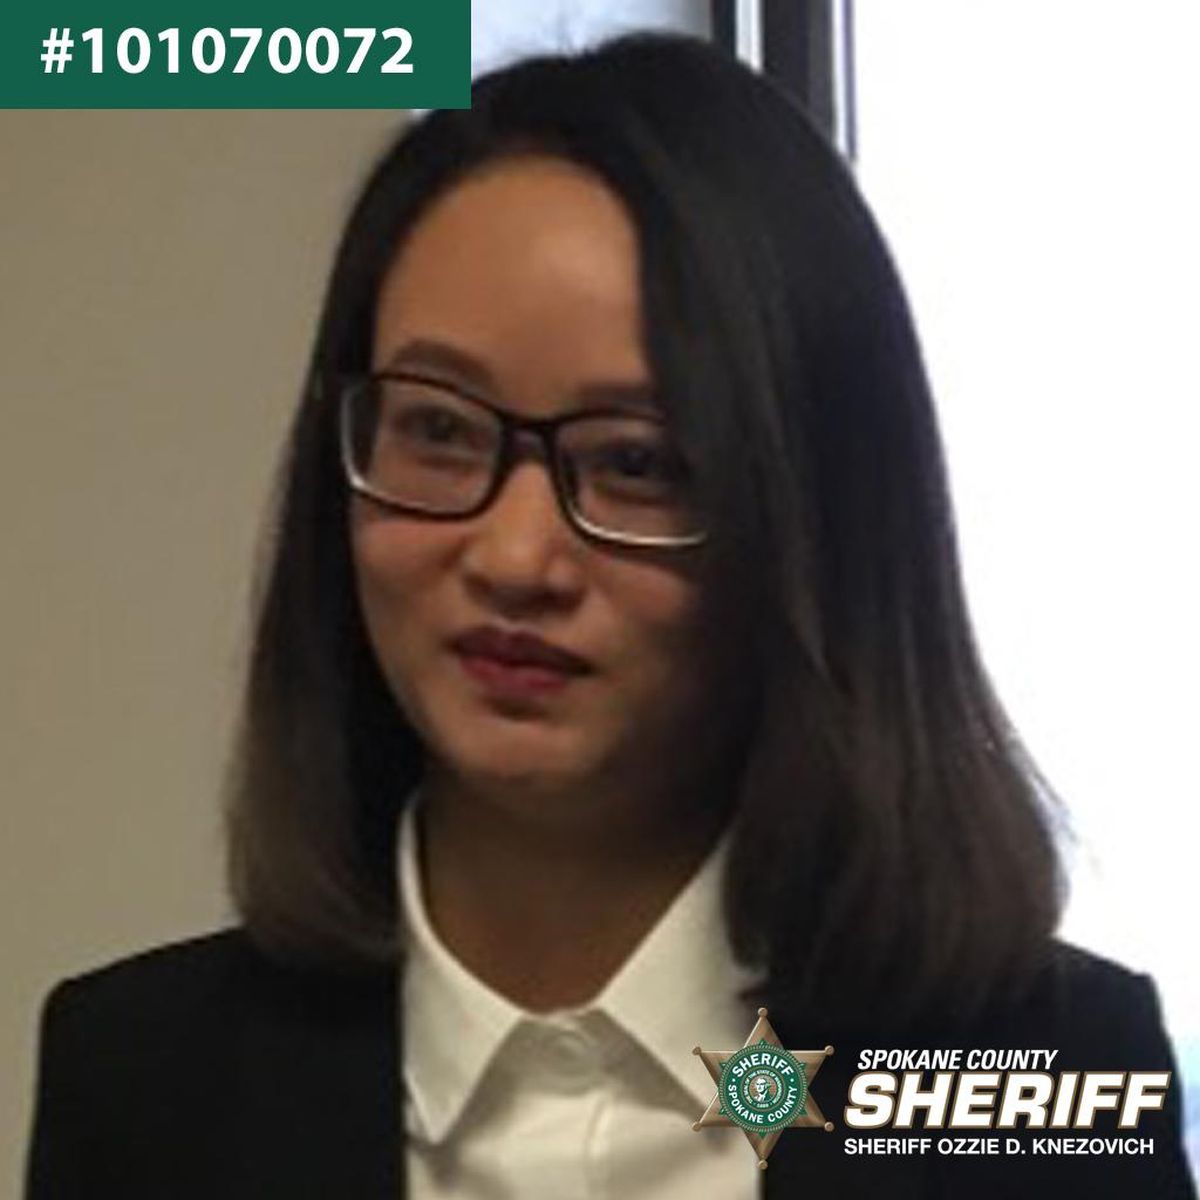 The Spokane County Sheriff’s Office is looking for Loc Nguyen, last heard from Monday evening. (Spokane County Sheriff’s Office)